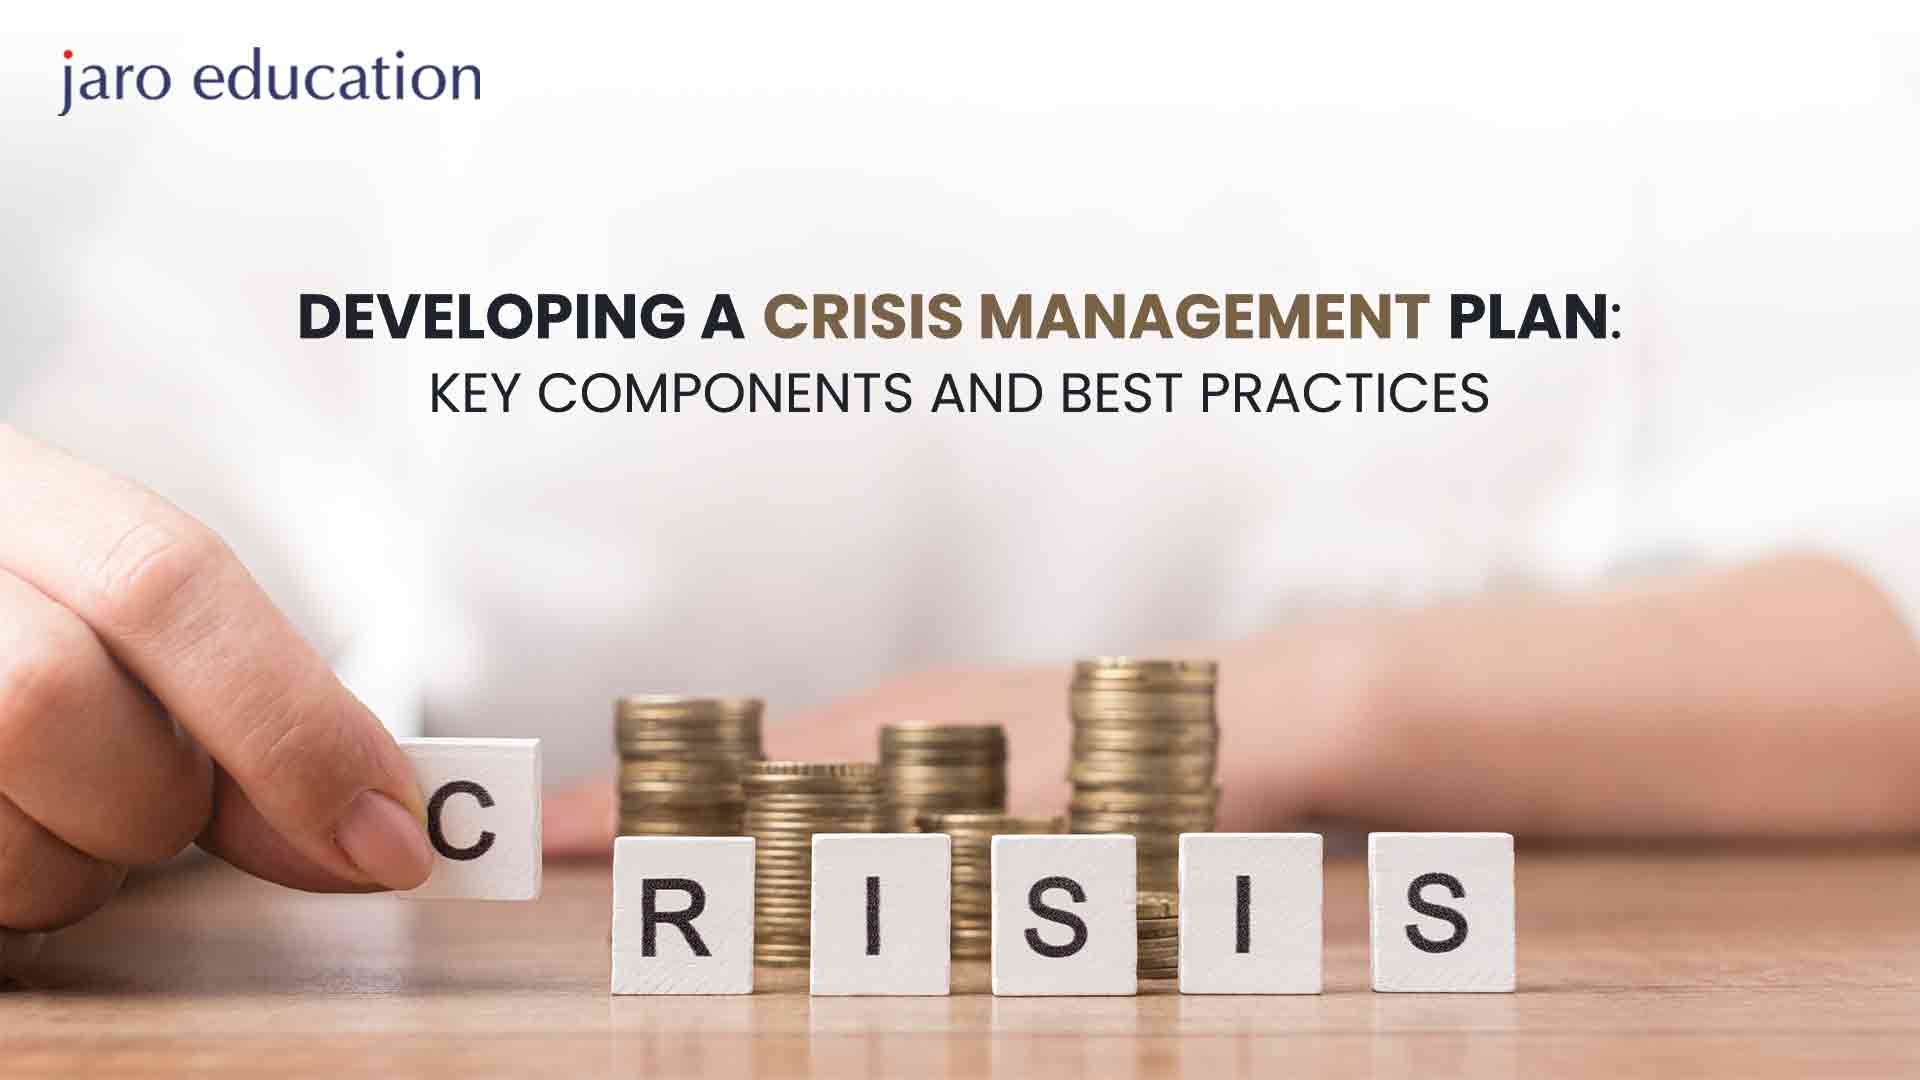 Developing a Crisis Management Plan Key Components and Best Practices